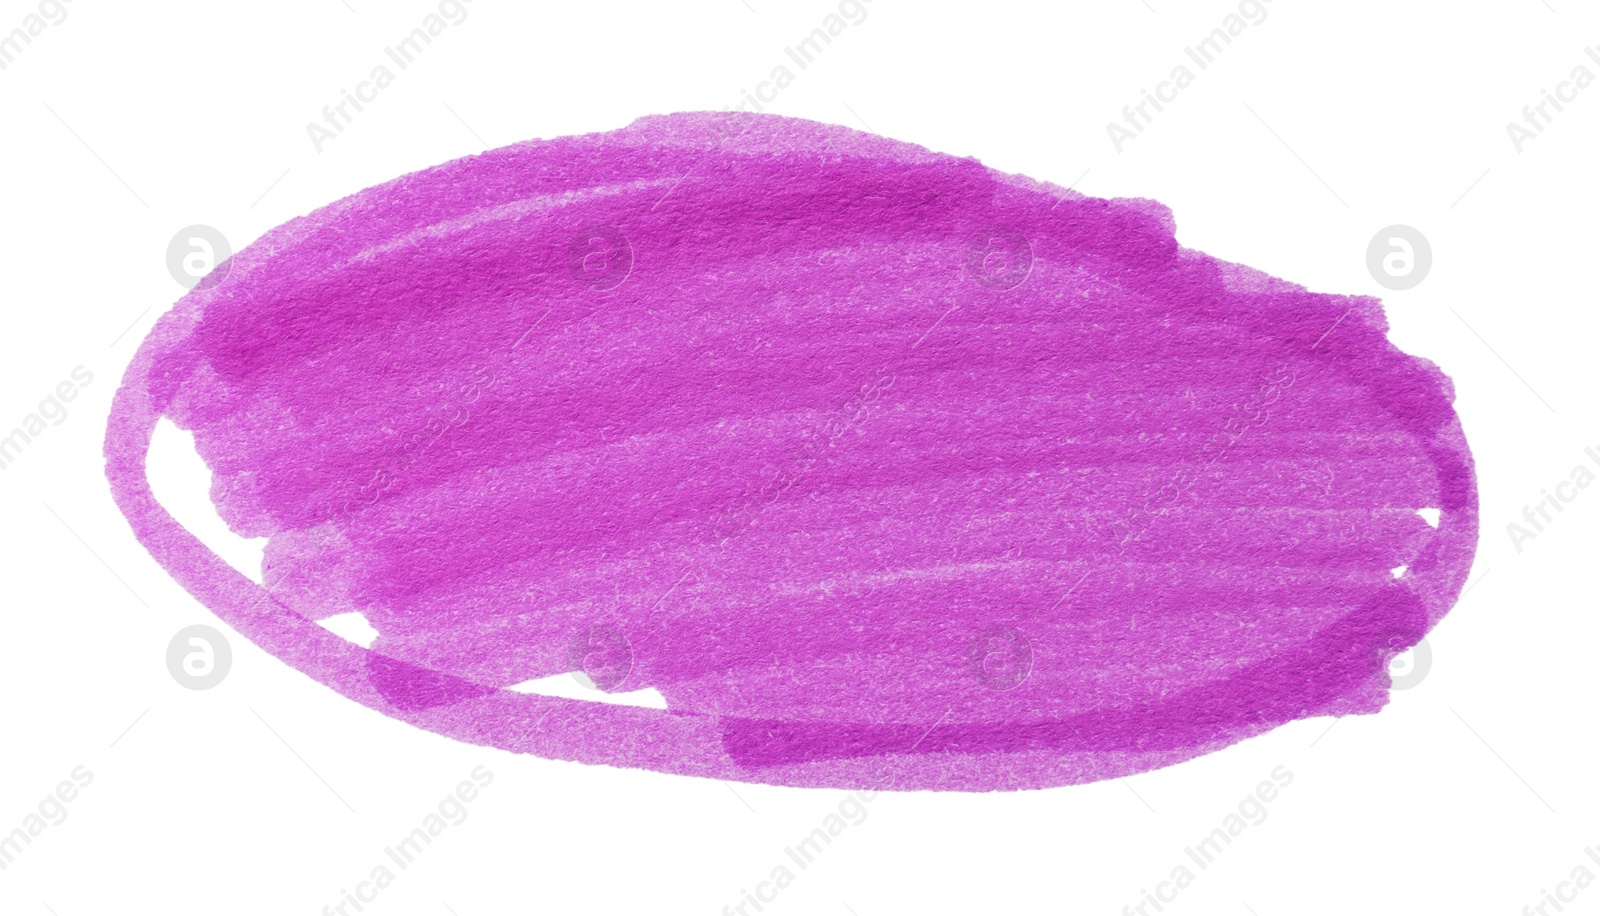 Photo of Oval doodle drawn with purple marker isolated on white, top view